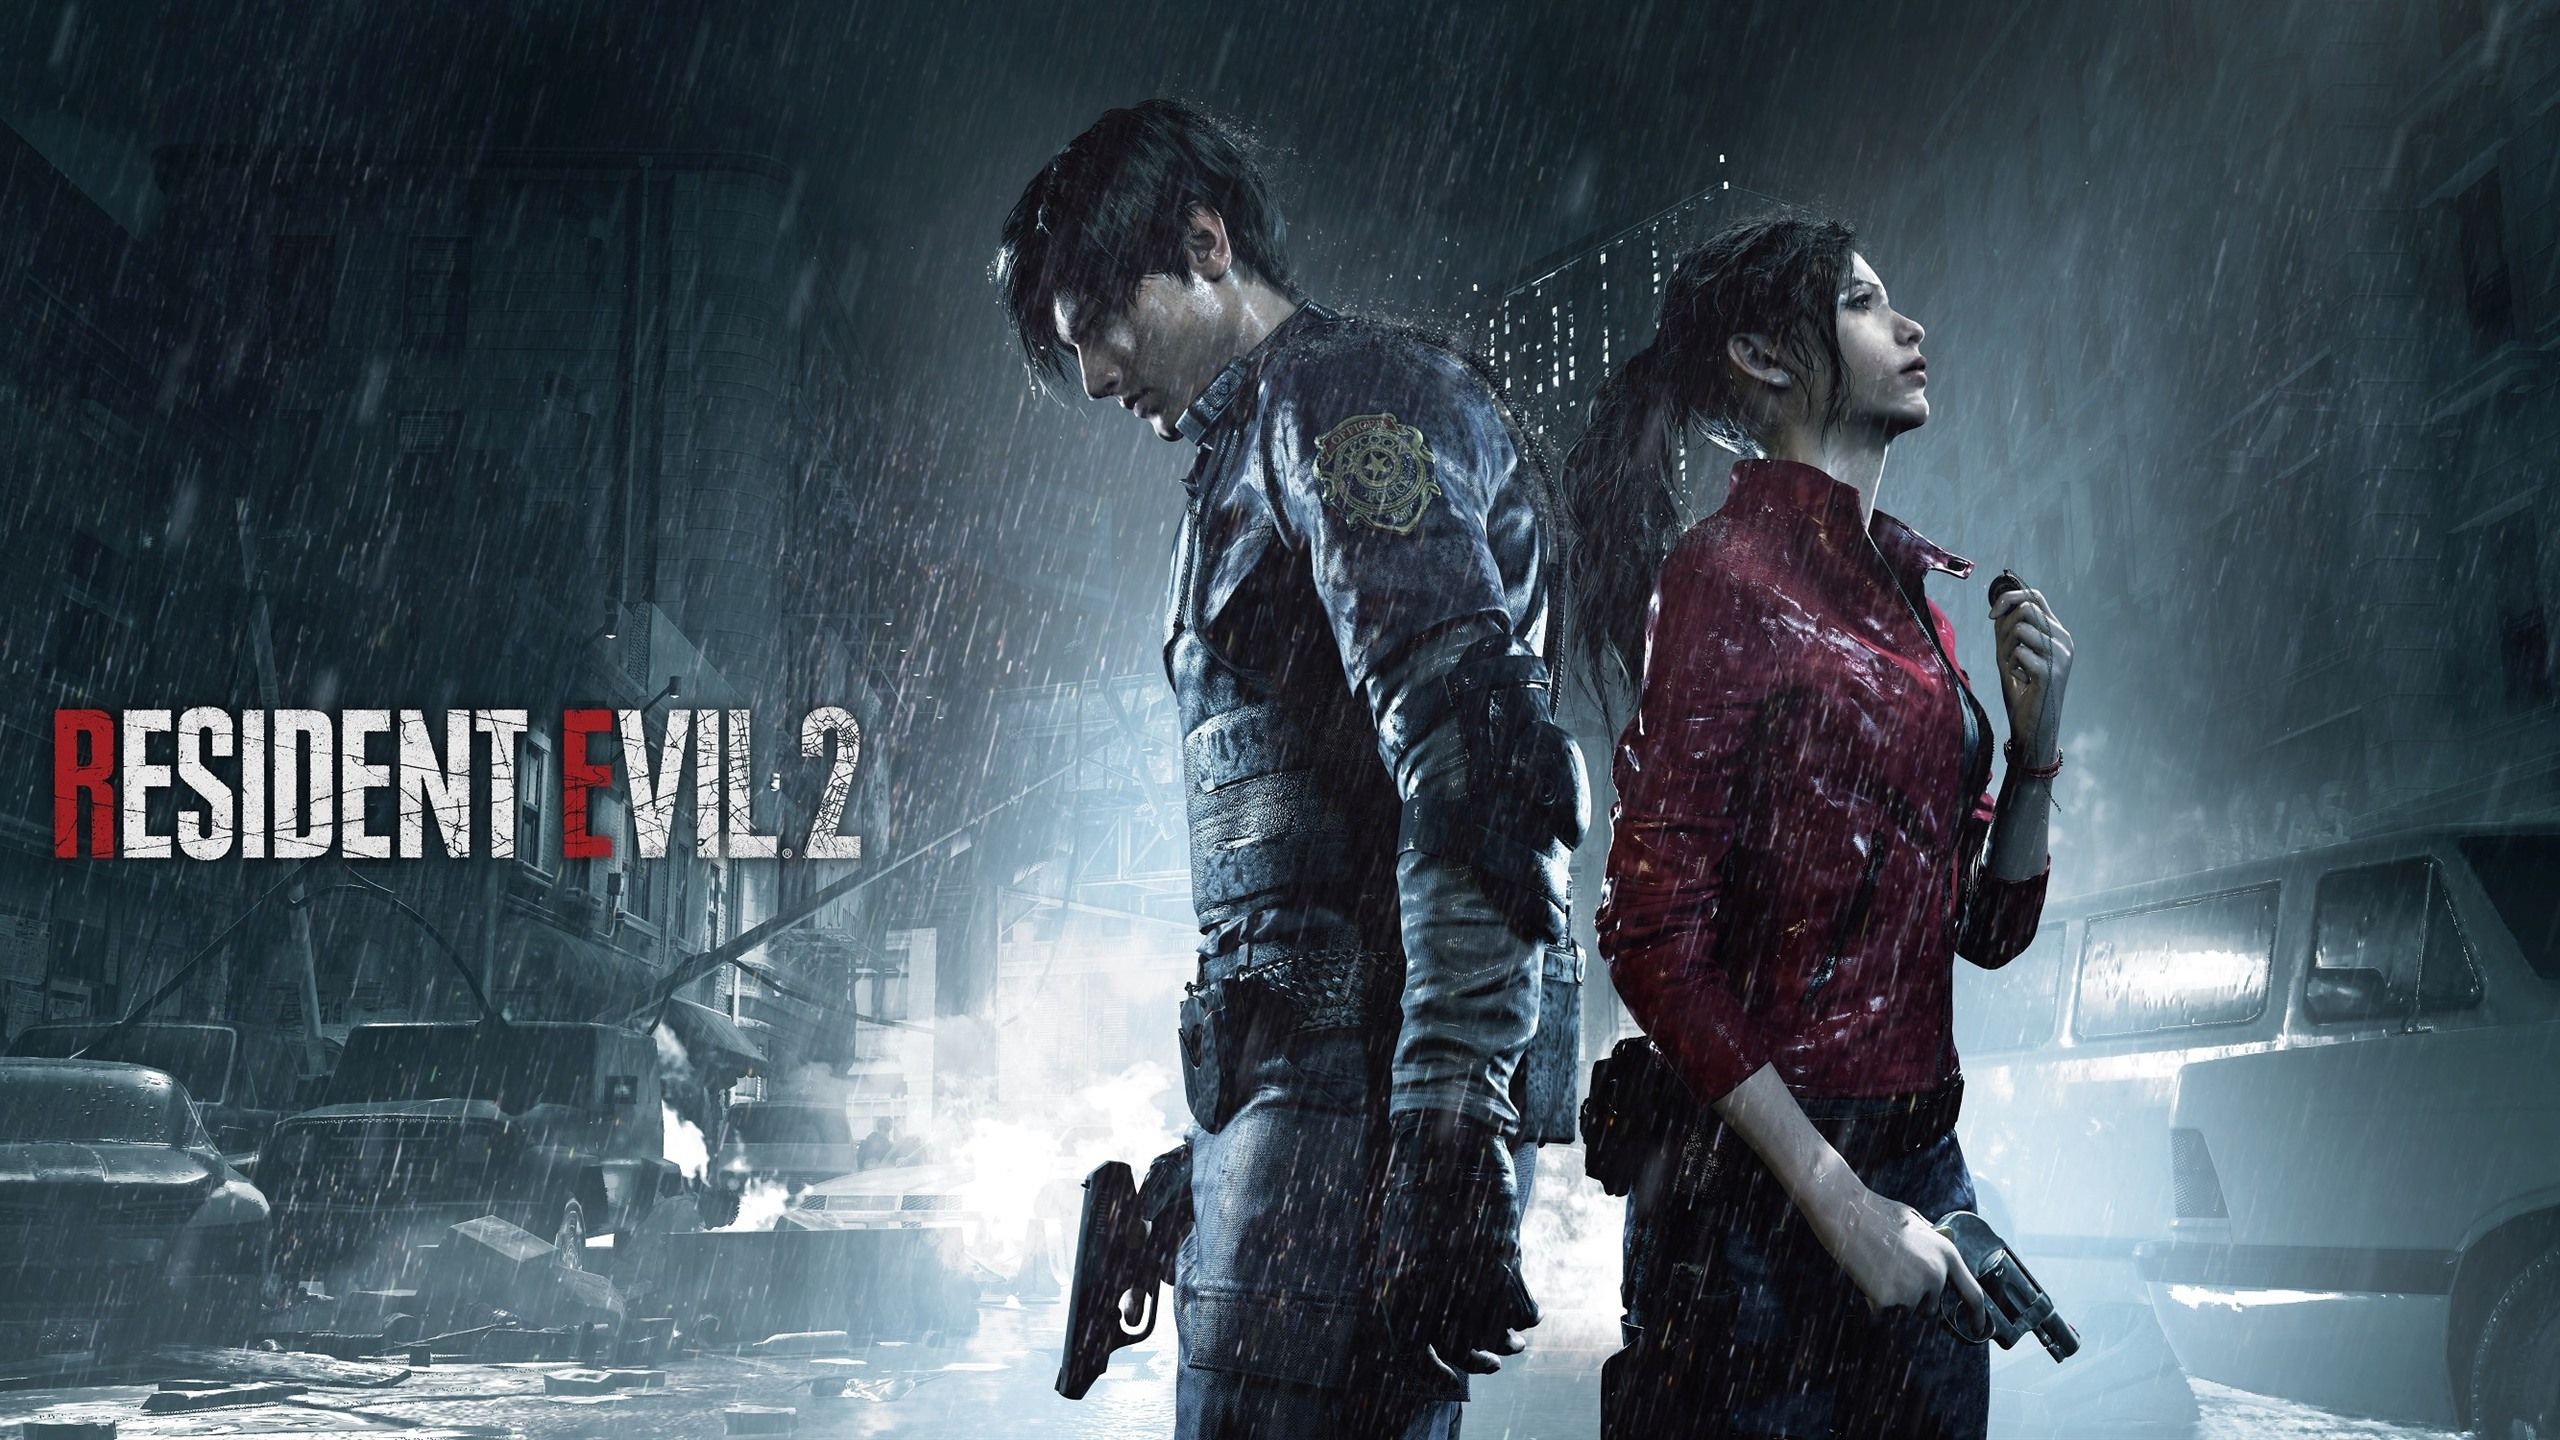 Wallpaper Resident Evil boy and girl, rain 2560x1440 QHD Picture, Image